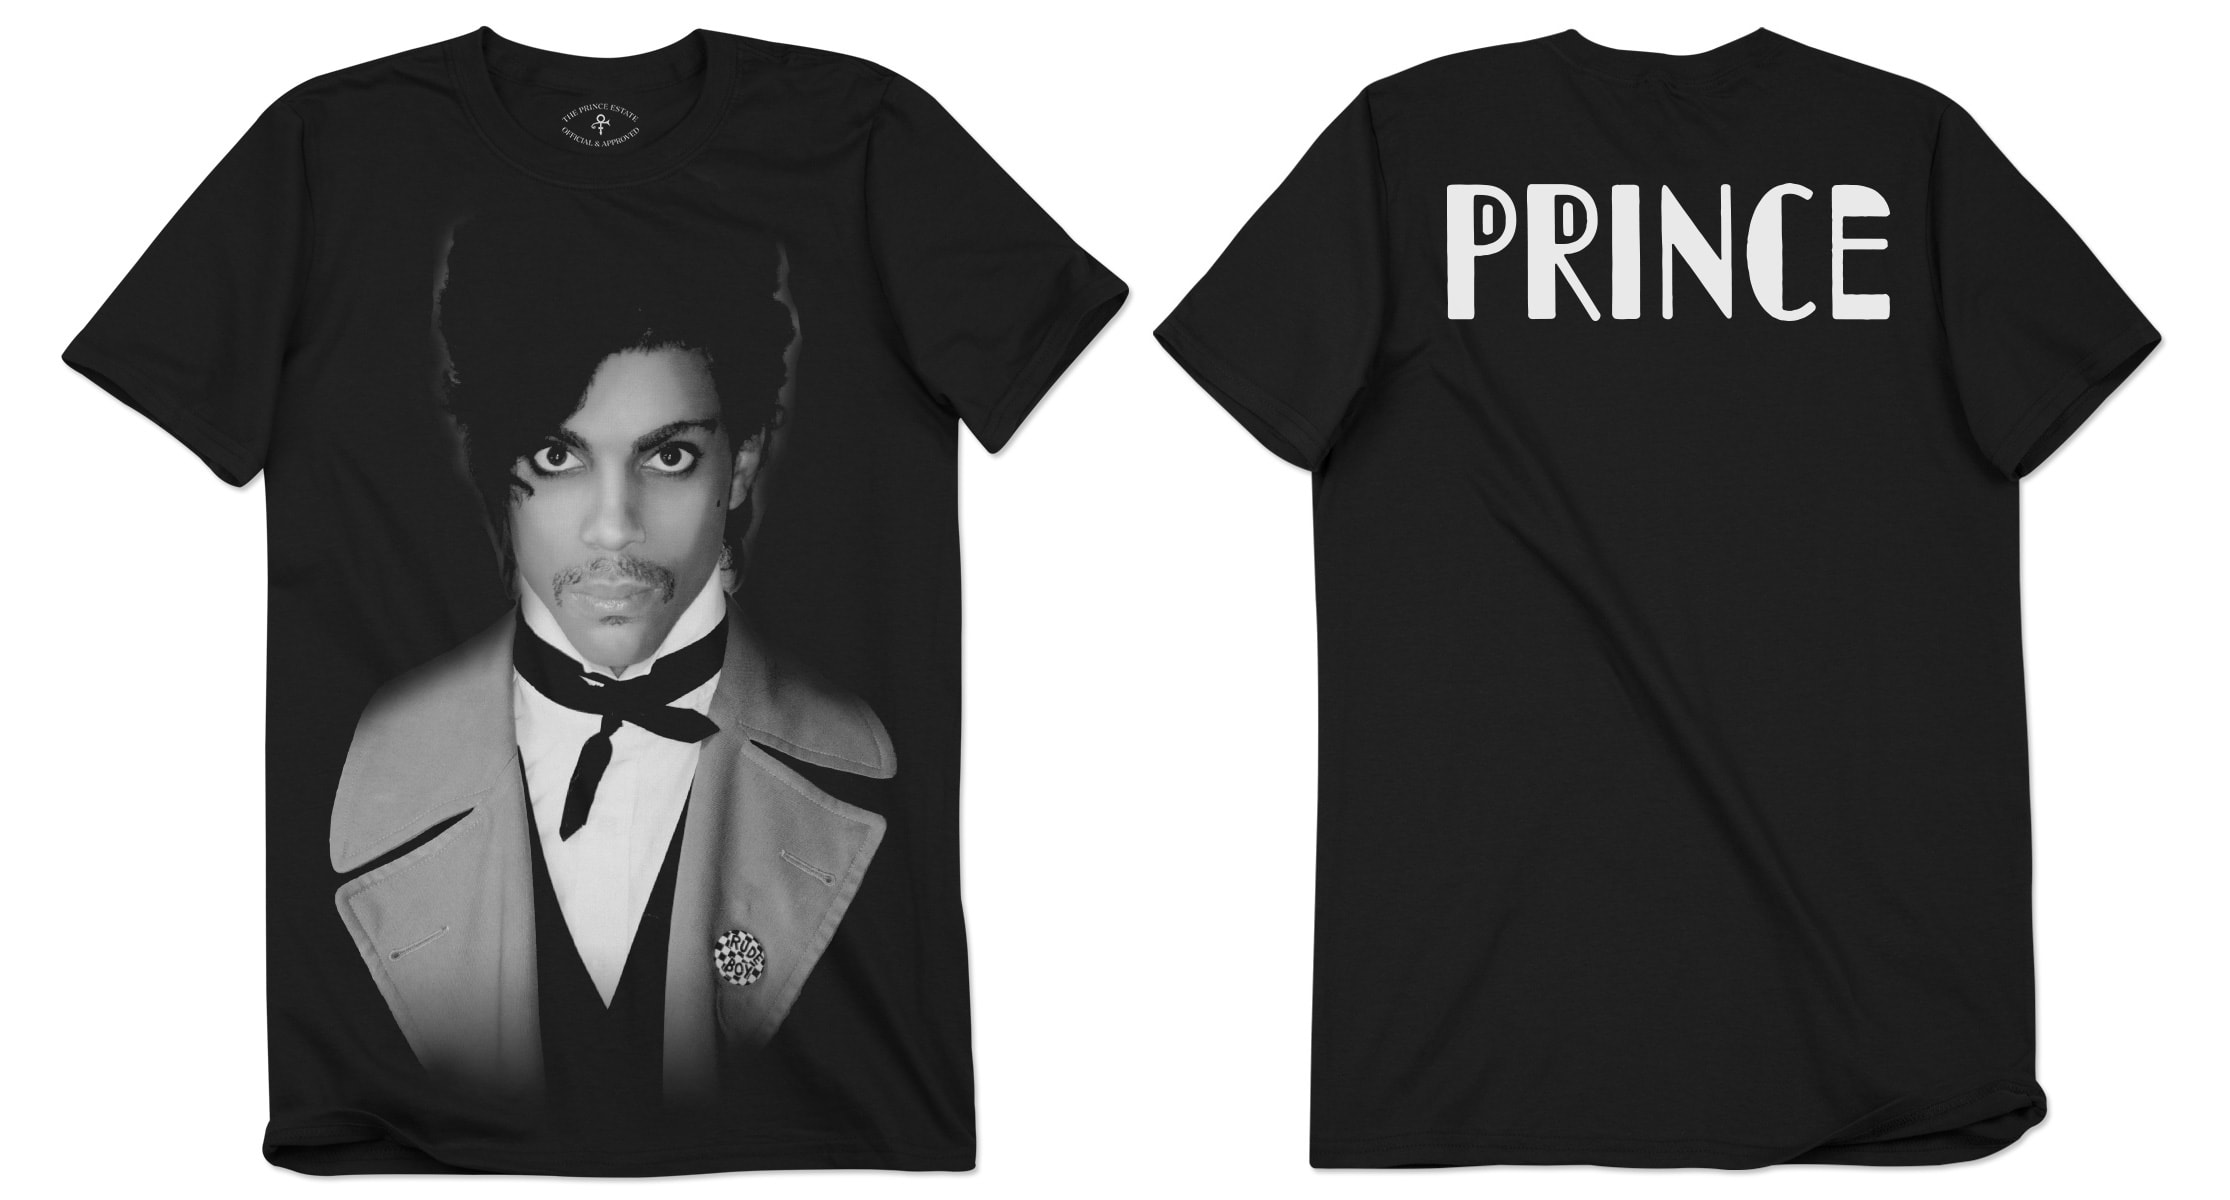 Prince &#x27;Controversy&#x27; t-shirt